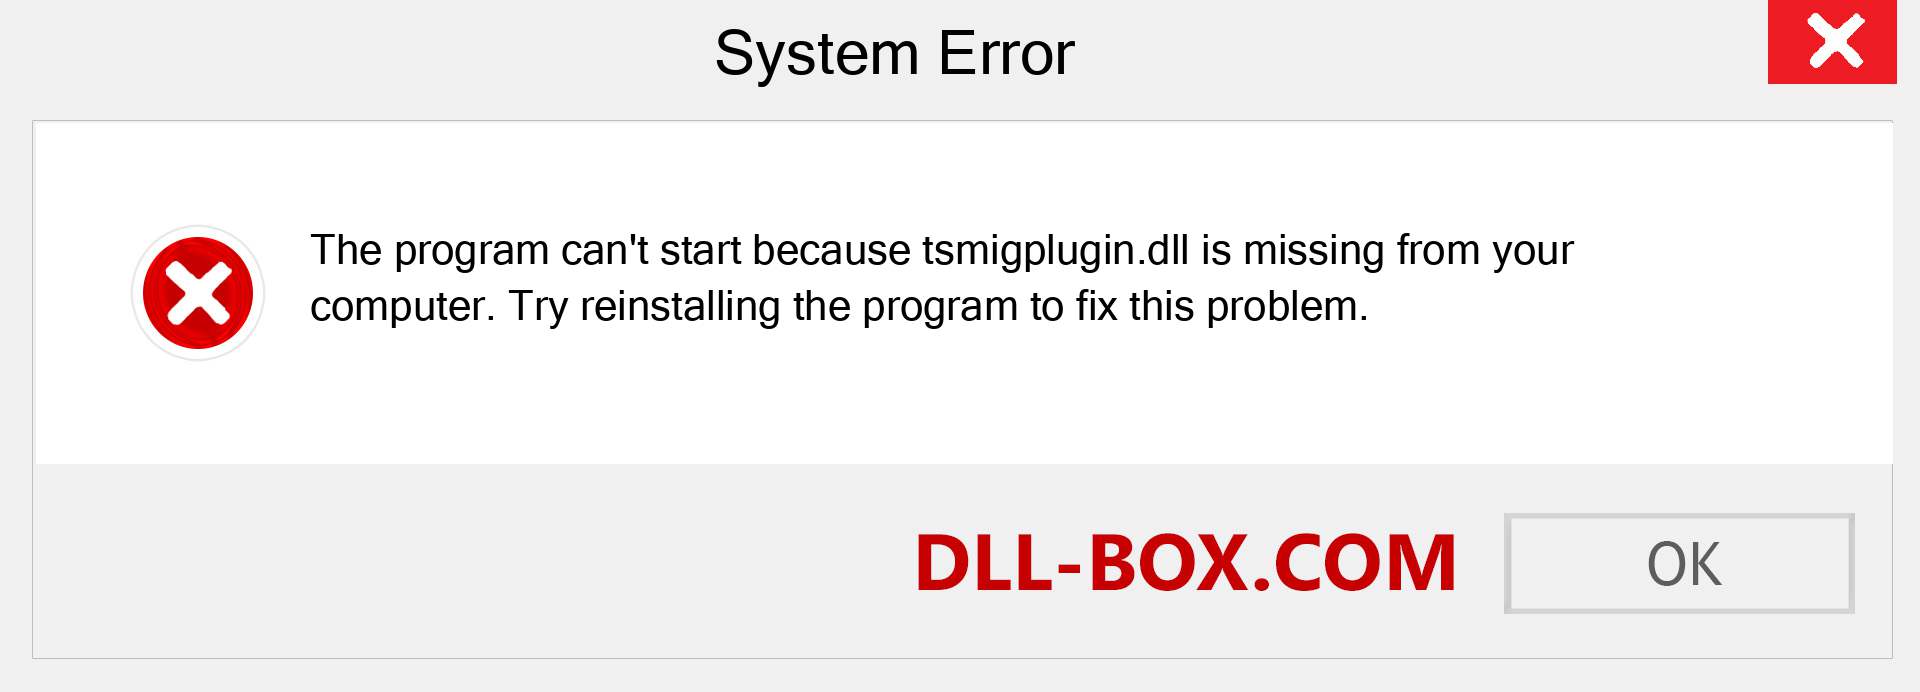  tsmigplugin.dll file is missing?. Download for Windows 7, 8, 10 - Fix  tsmigplugin dll Missing Error on Windows, photos, images